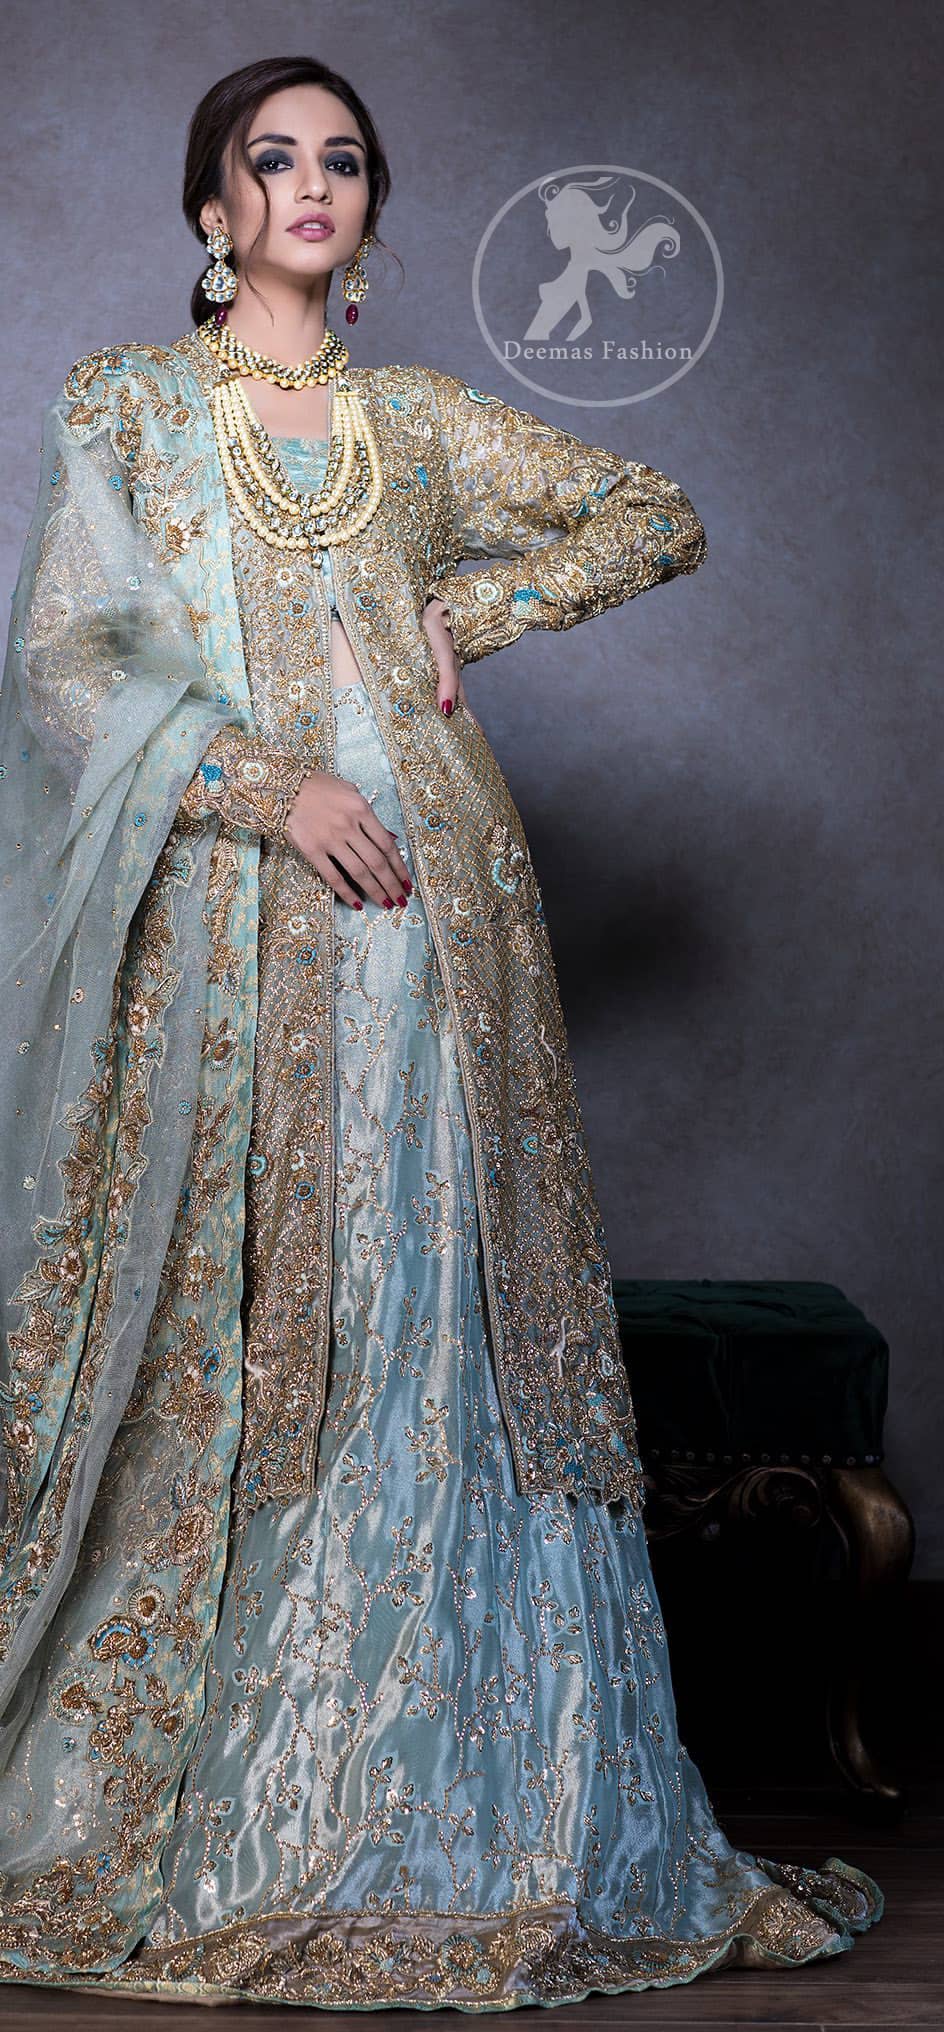 This regal regent gray outfit is an immensely captivating traditional piece, enhancing the art of classical heritage showcasing the craftsmanship of kora, dabka & mukesh detailed with pearls; artistically embellished to give a beautiful rhythm to the outfit. Gown is heavily embellished with antique zardosi work and floral thread embroidery. It comes with embellished lehenga enhanced with embroidered applique on the bottom. It comes with organza dupatta with embellished scalloped border at all ends.